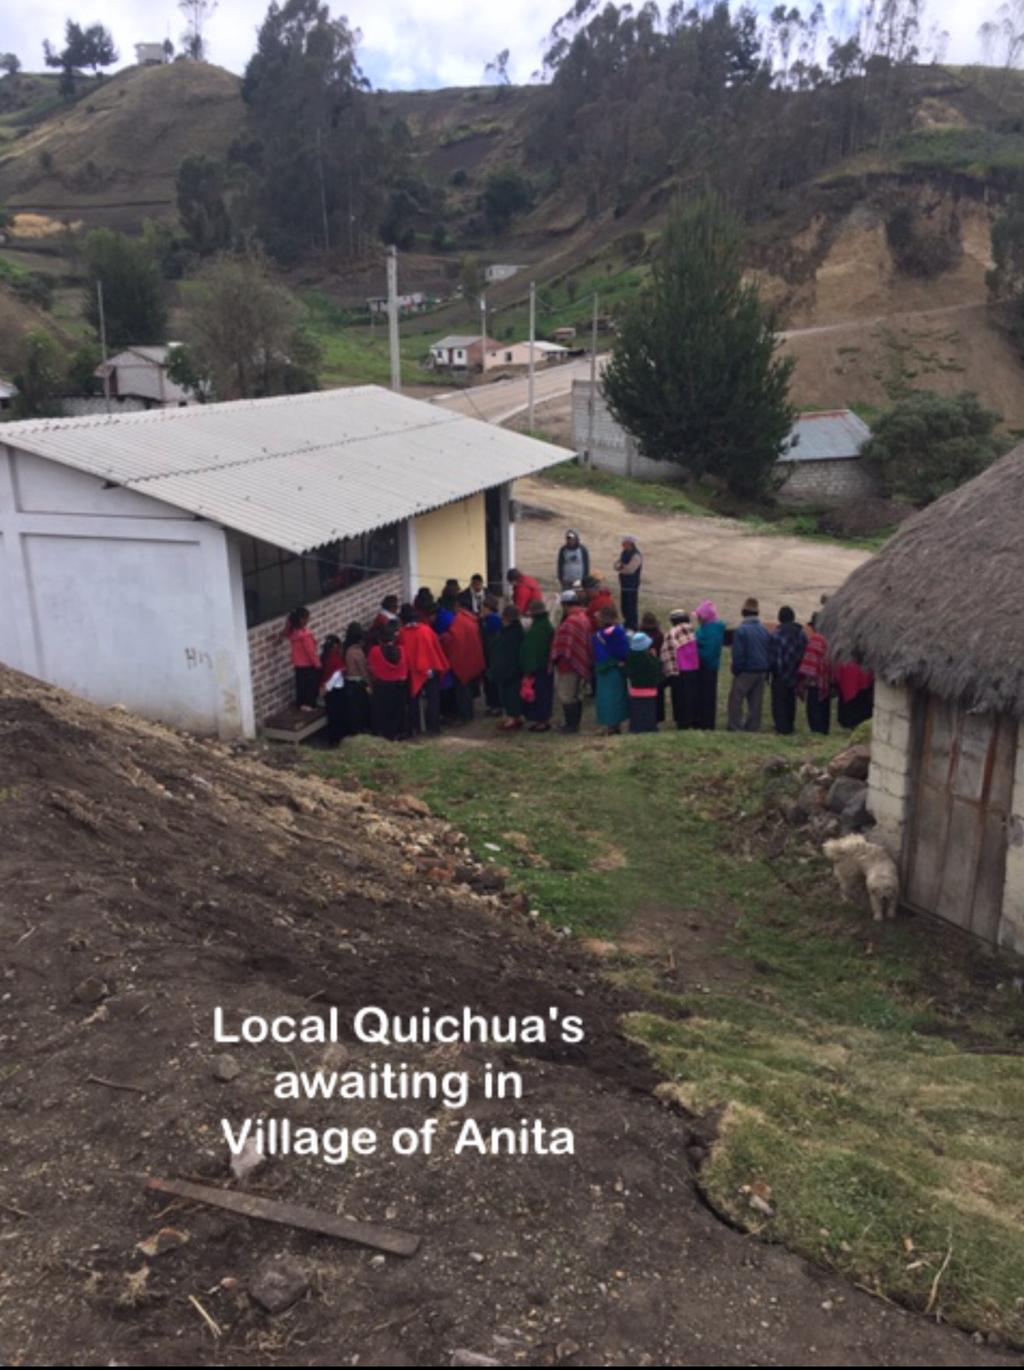 Hidden from the teams prior knowledge, their first two days would be spent in the village of Anita.